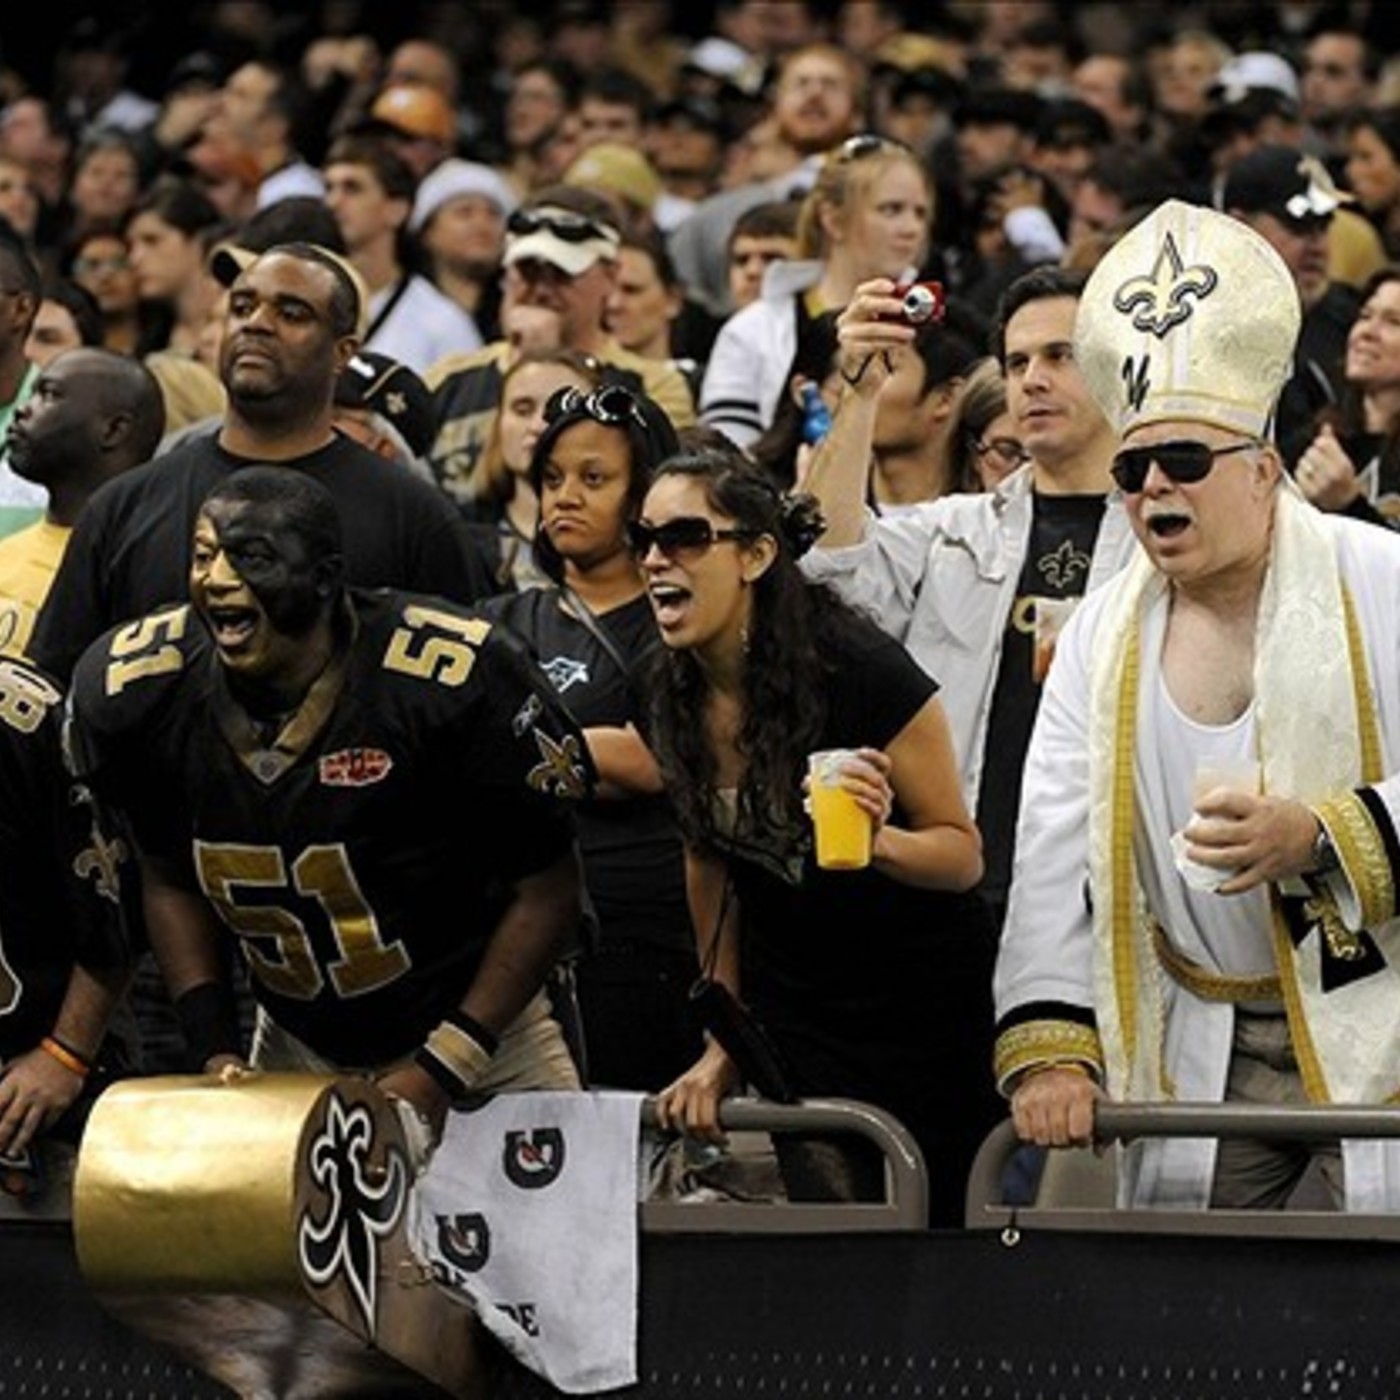 Patron Spotlight: And You Thought The Saints Loss In NFC Title Made You Sad...